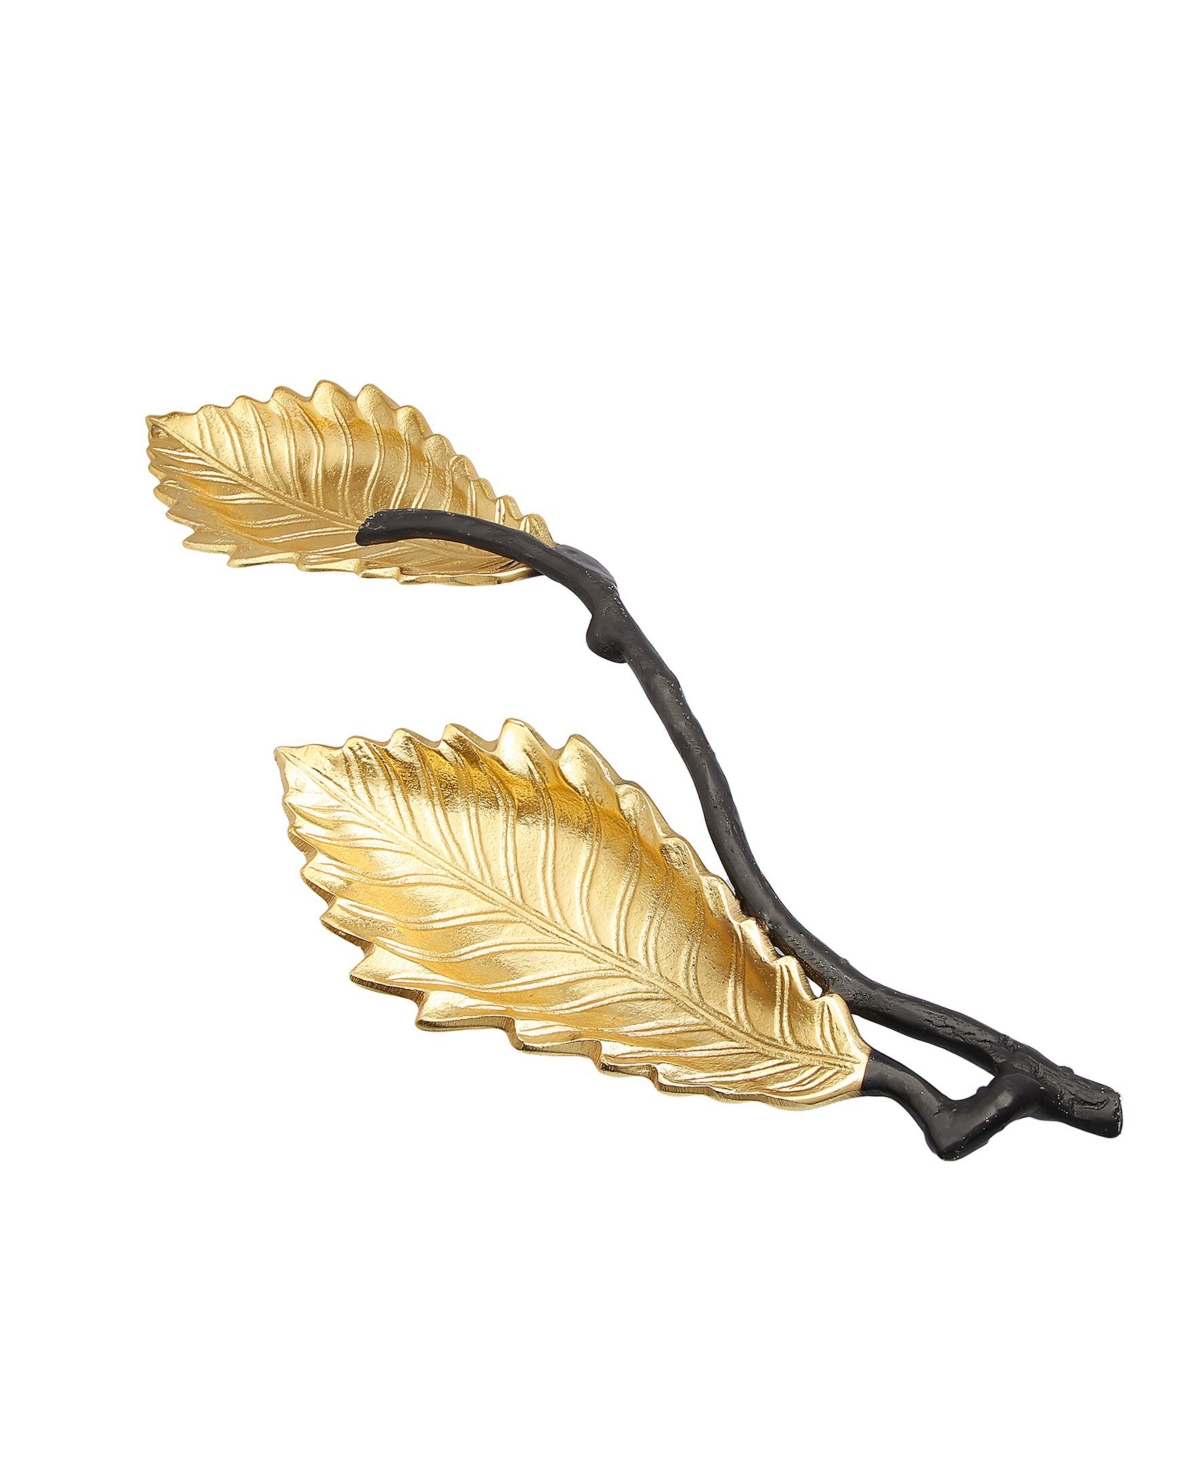 Gold 2 Bowl Relish Dish with Black Branches - Gold